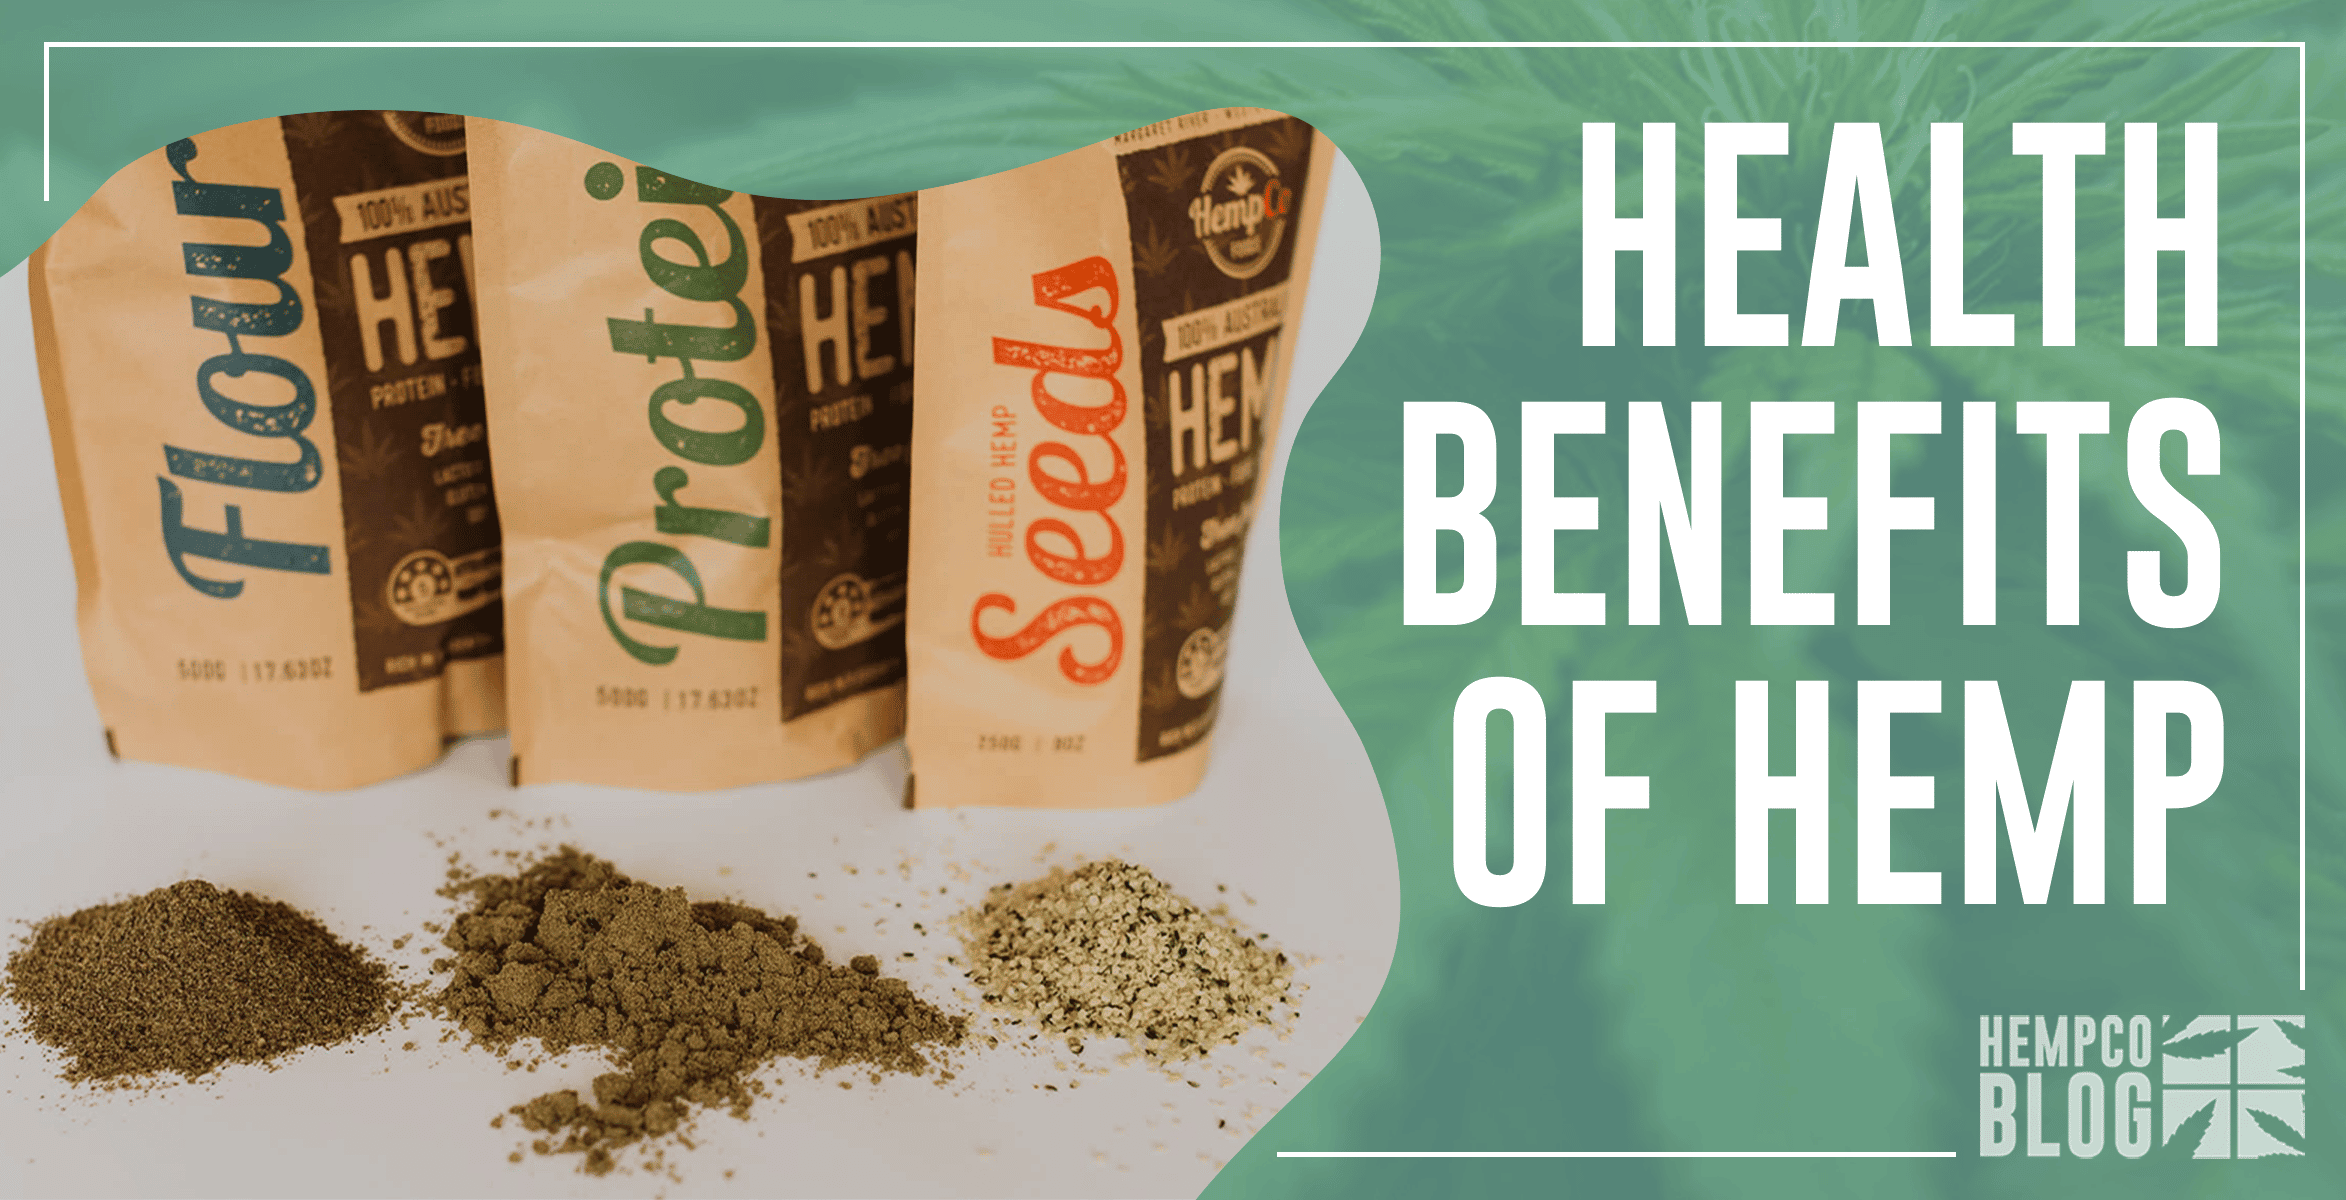 What Are the Health Benefits of Hemp Seeds?